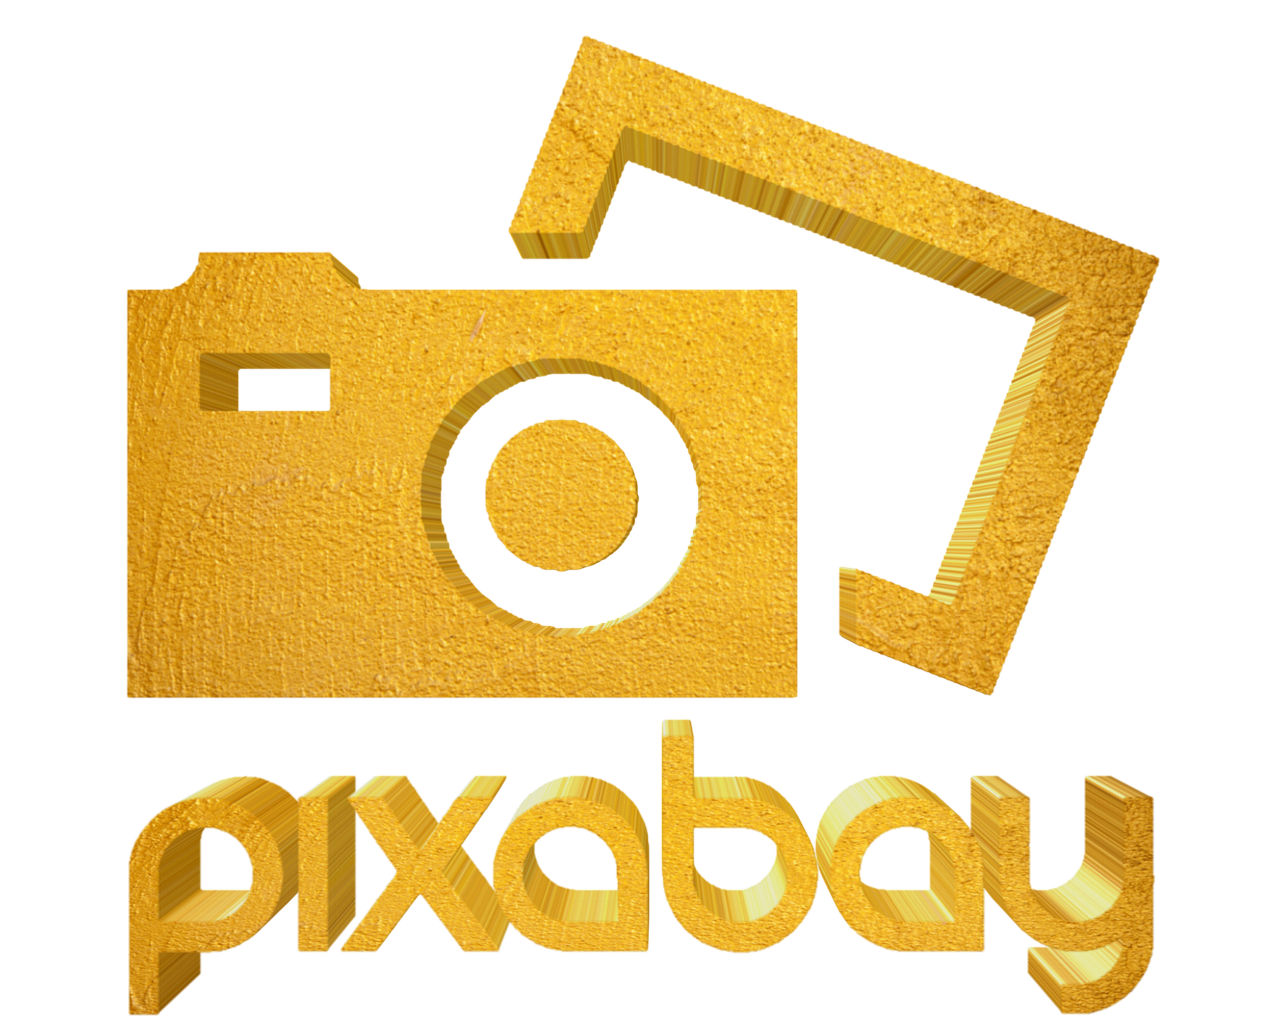 pixabay font the creation of free photo